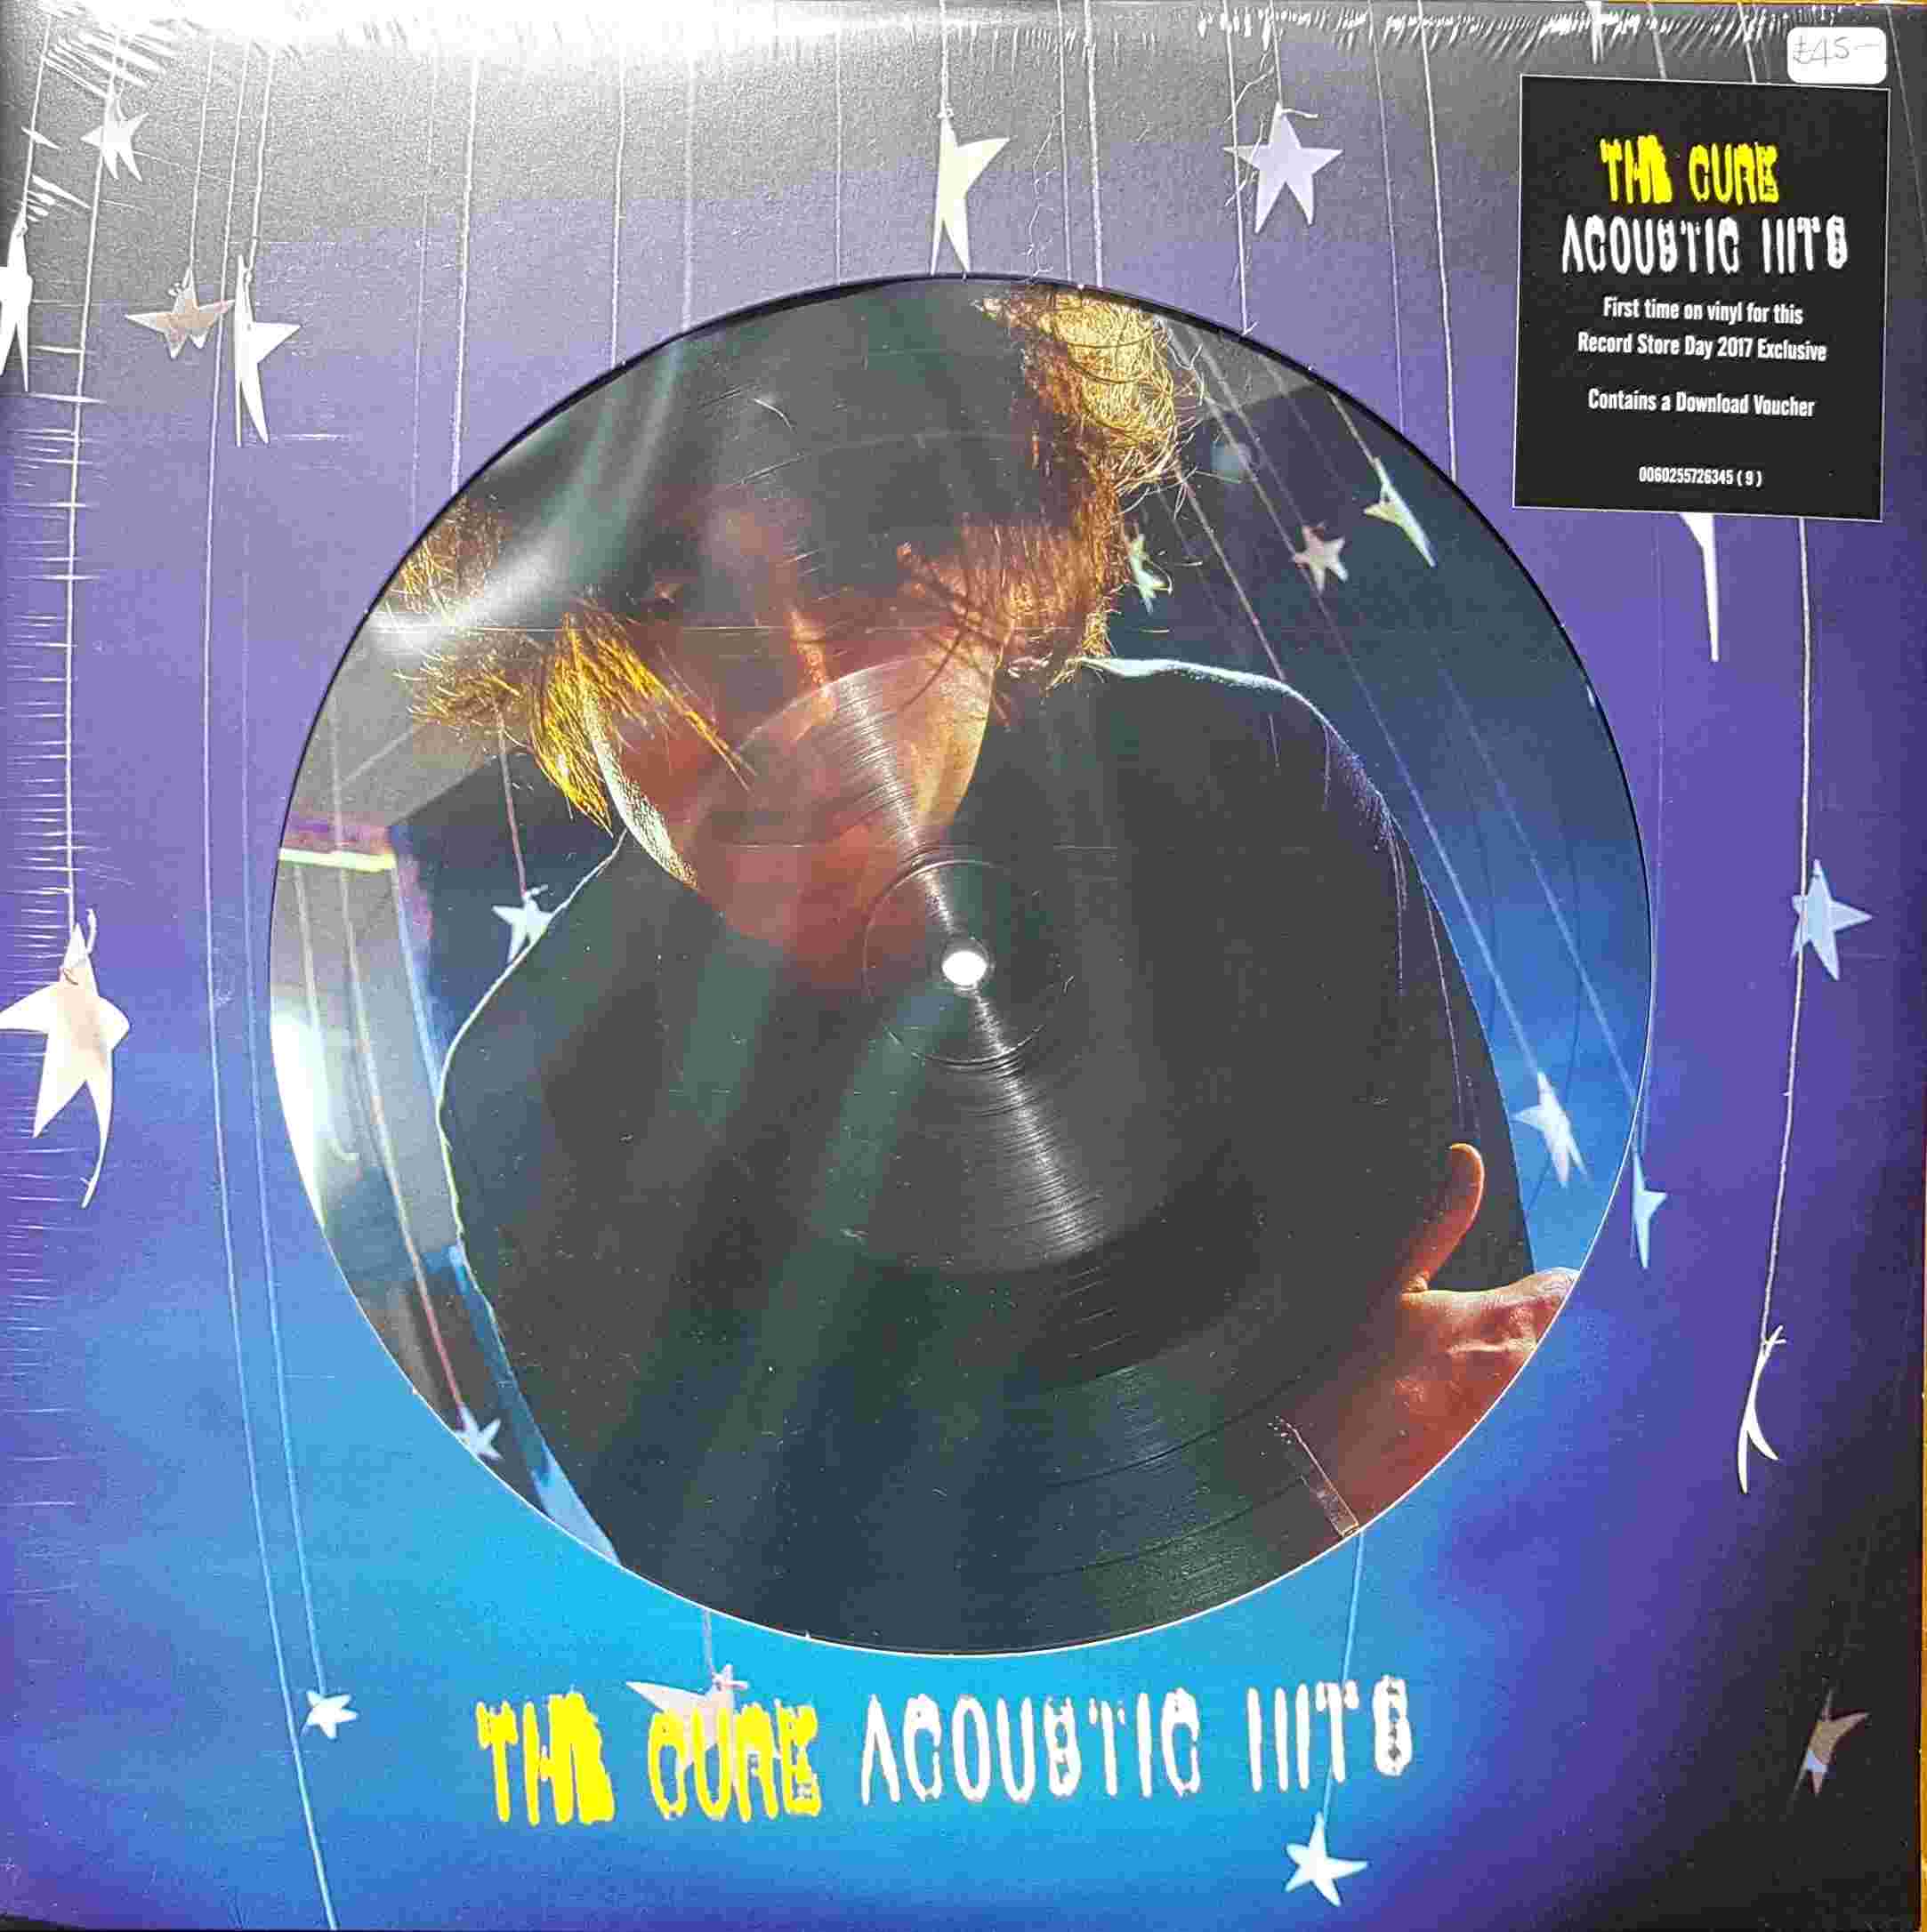 Picture of 572634 - 5 Acoustic hits - Limited edition picture discs - Record Store Day 2017 by artist The Cure 